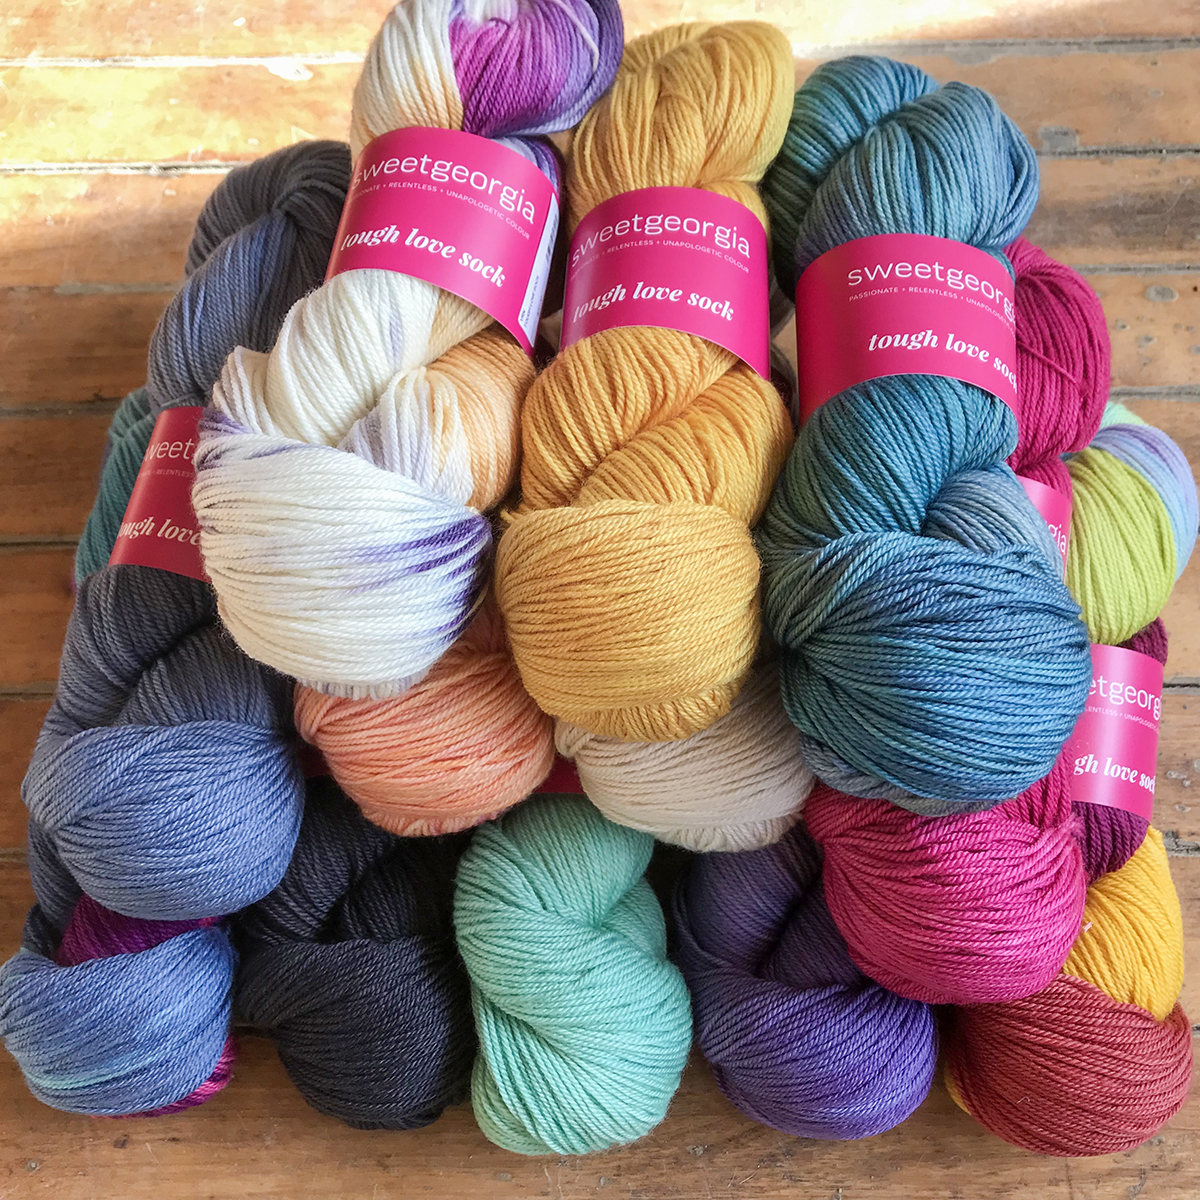 What to expect when knitting with Superwash – Elizabeth Smith Knits